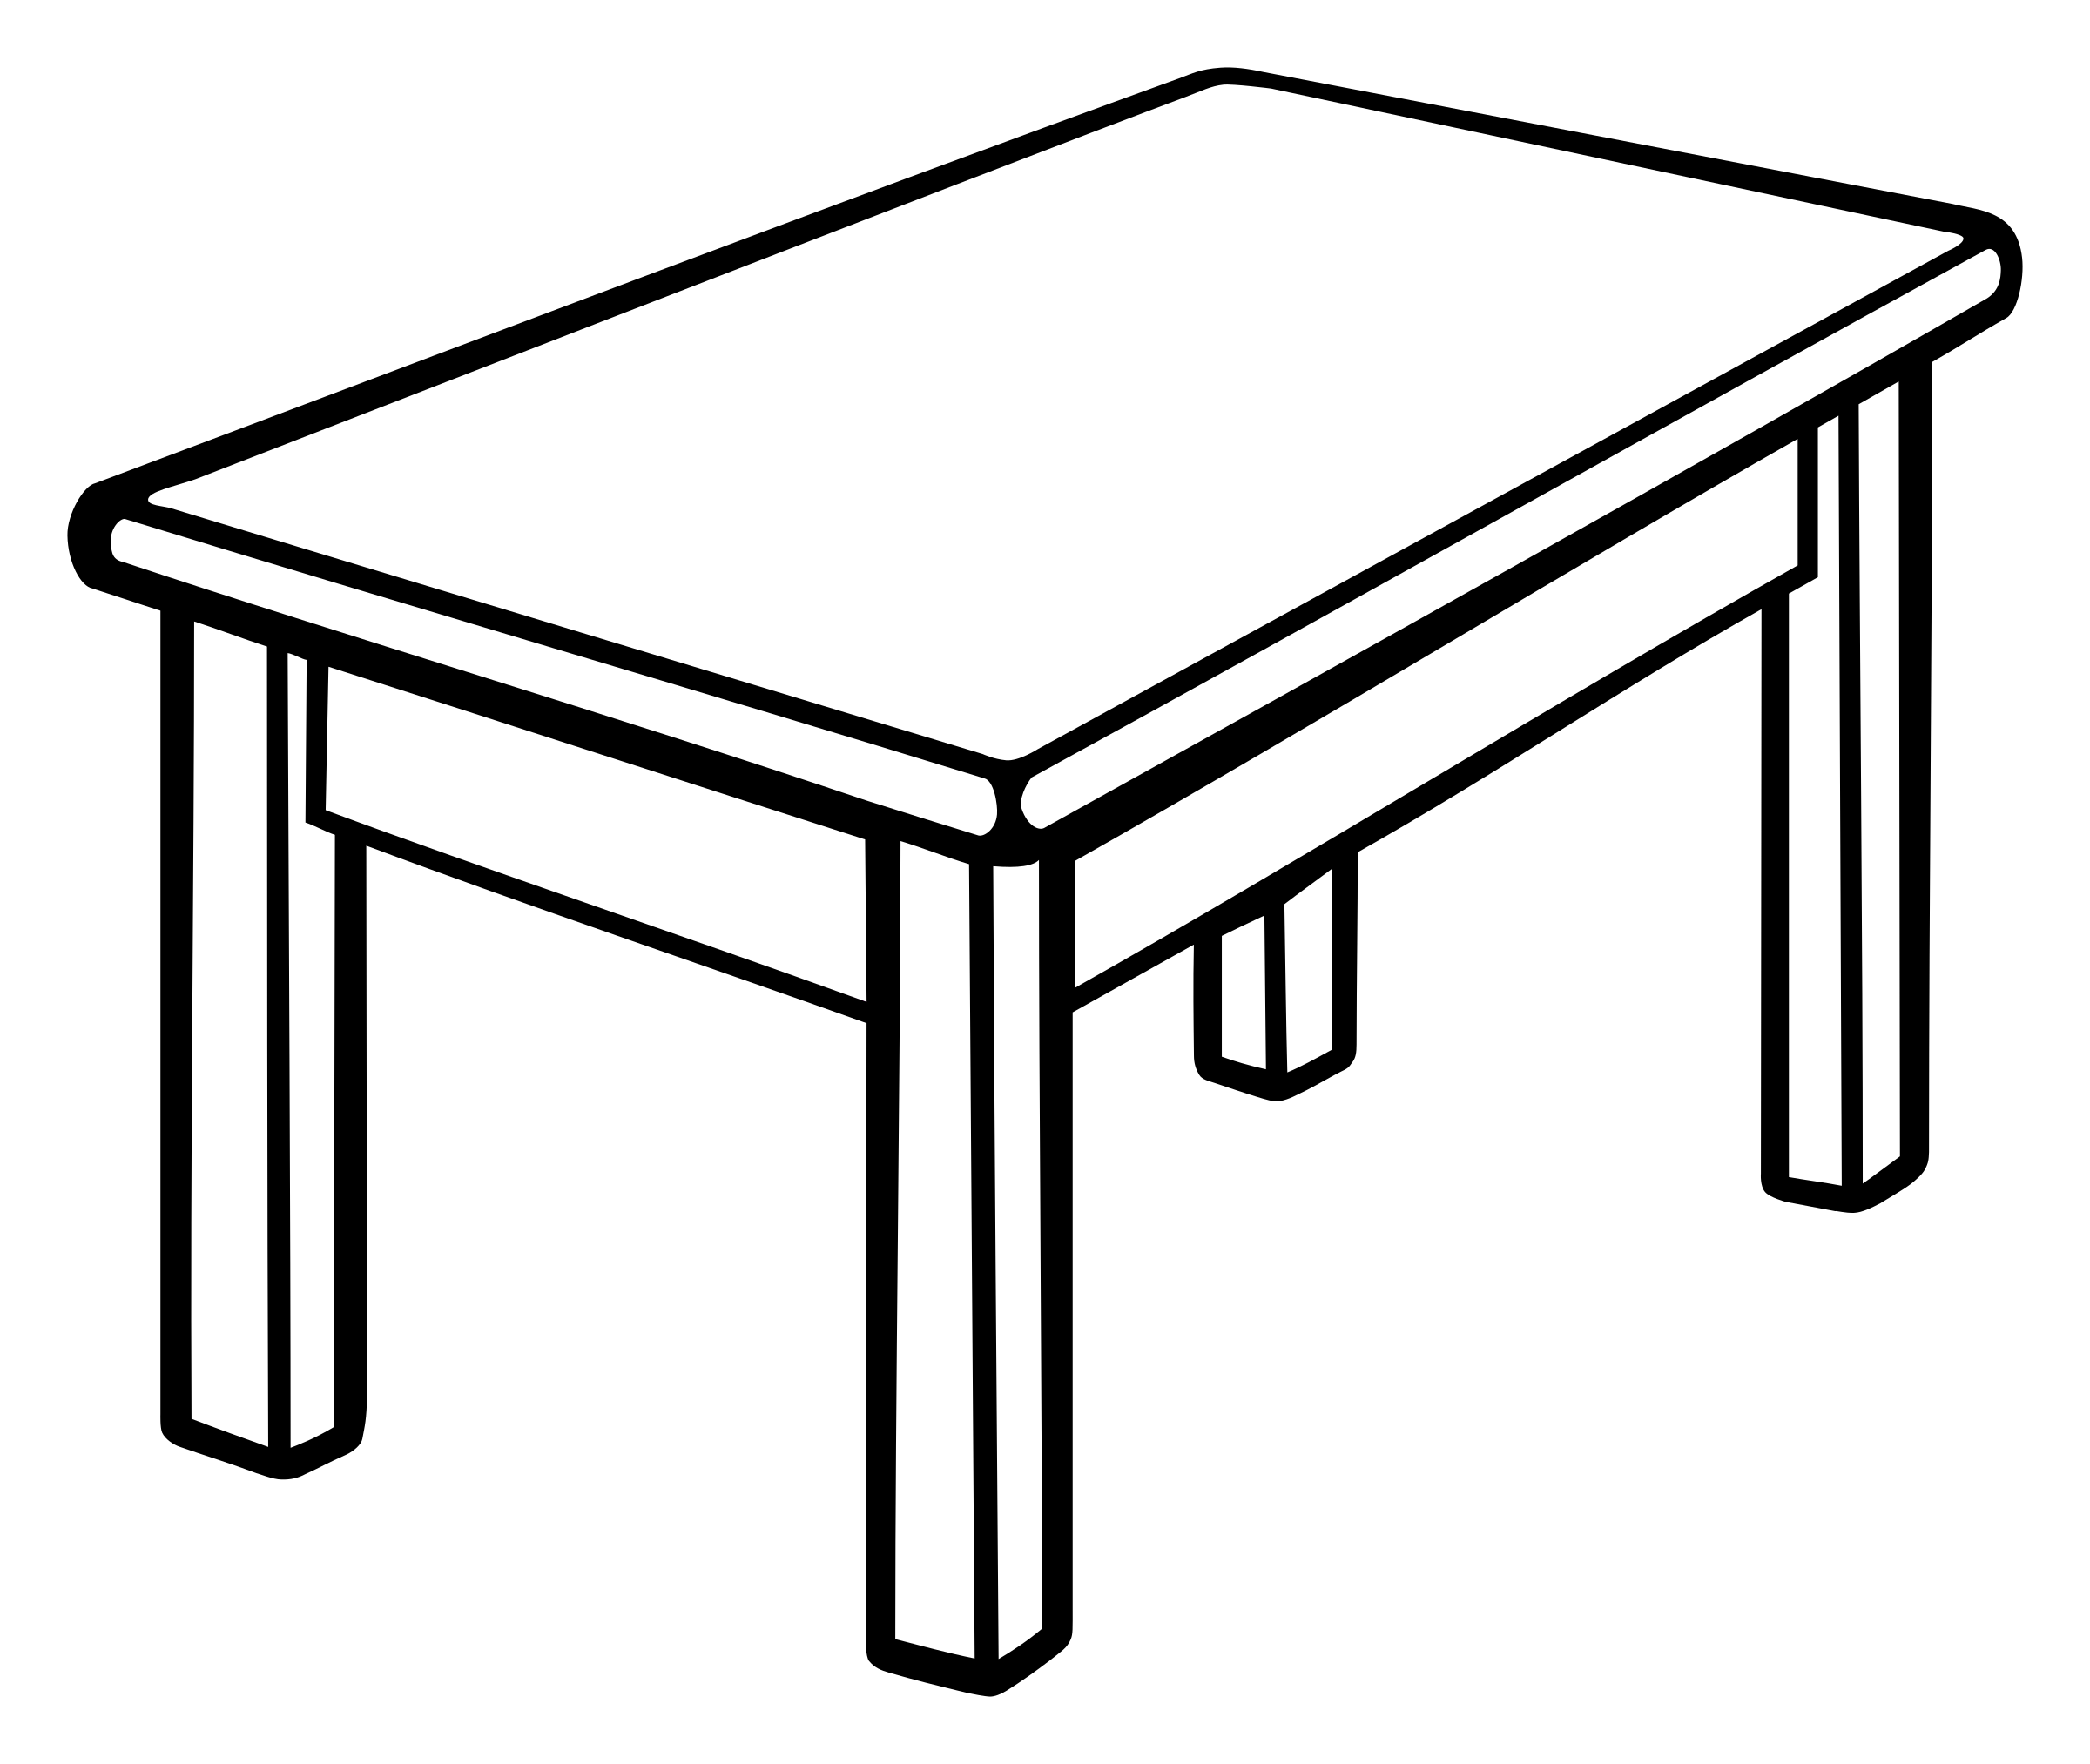 Clipart - table - lineart